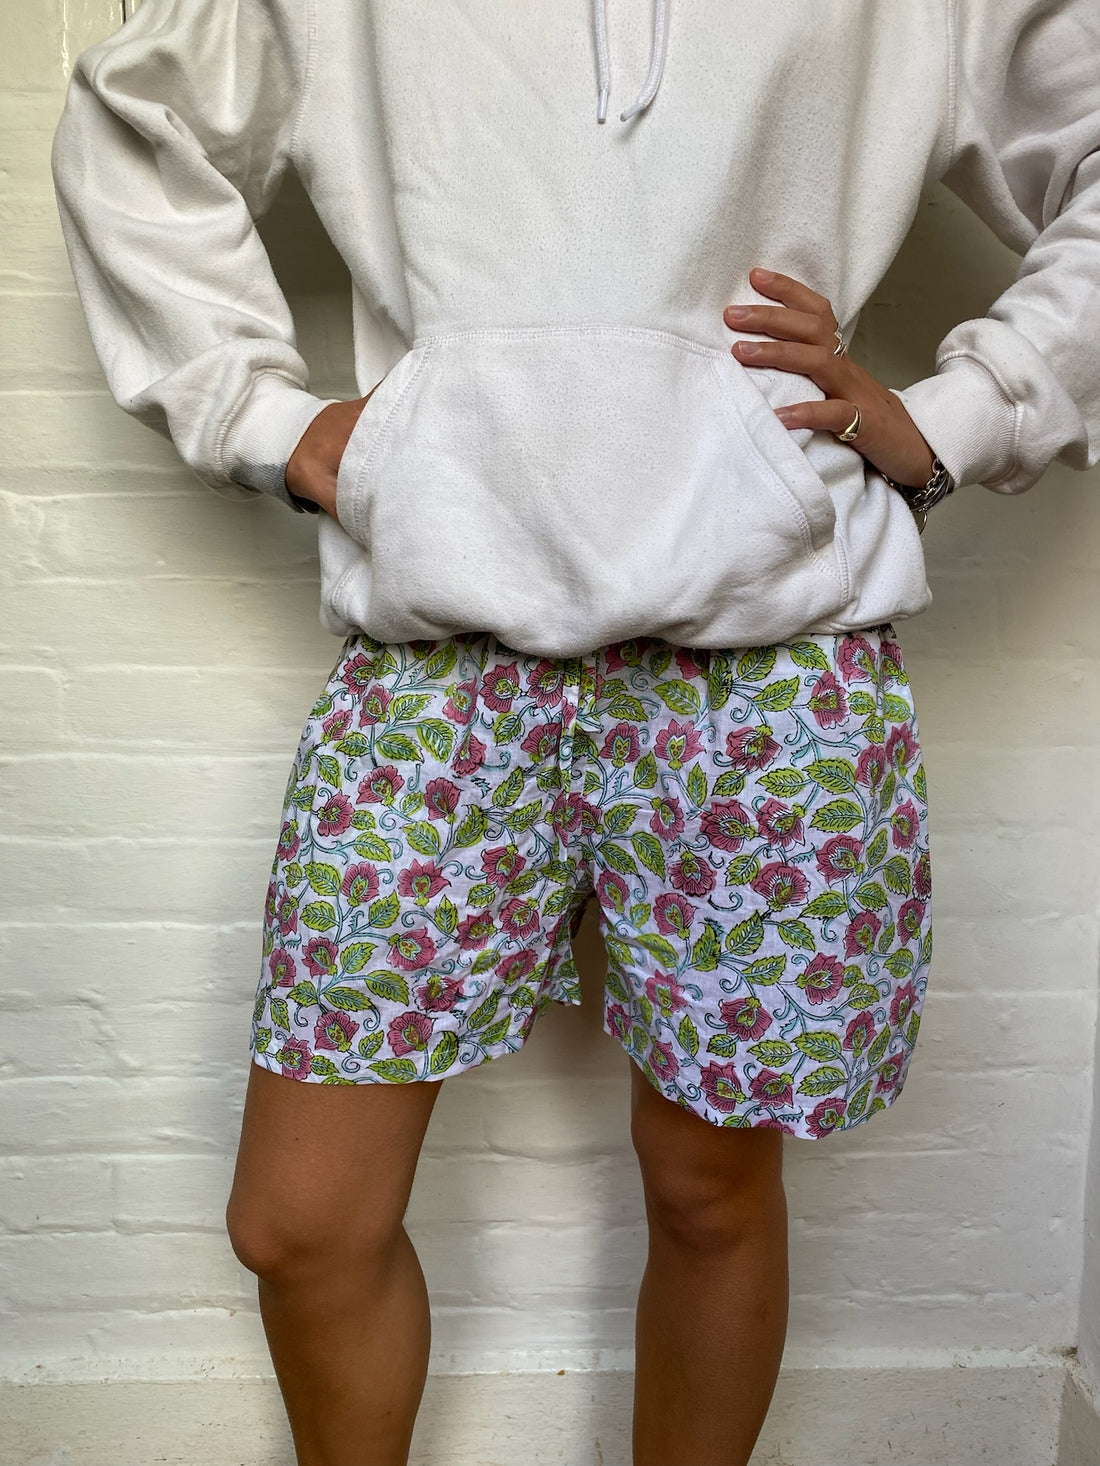 Unisex Indian Block Print Boxer shorts - Lime and Pink